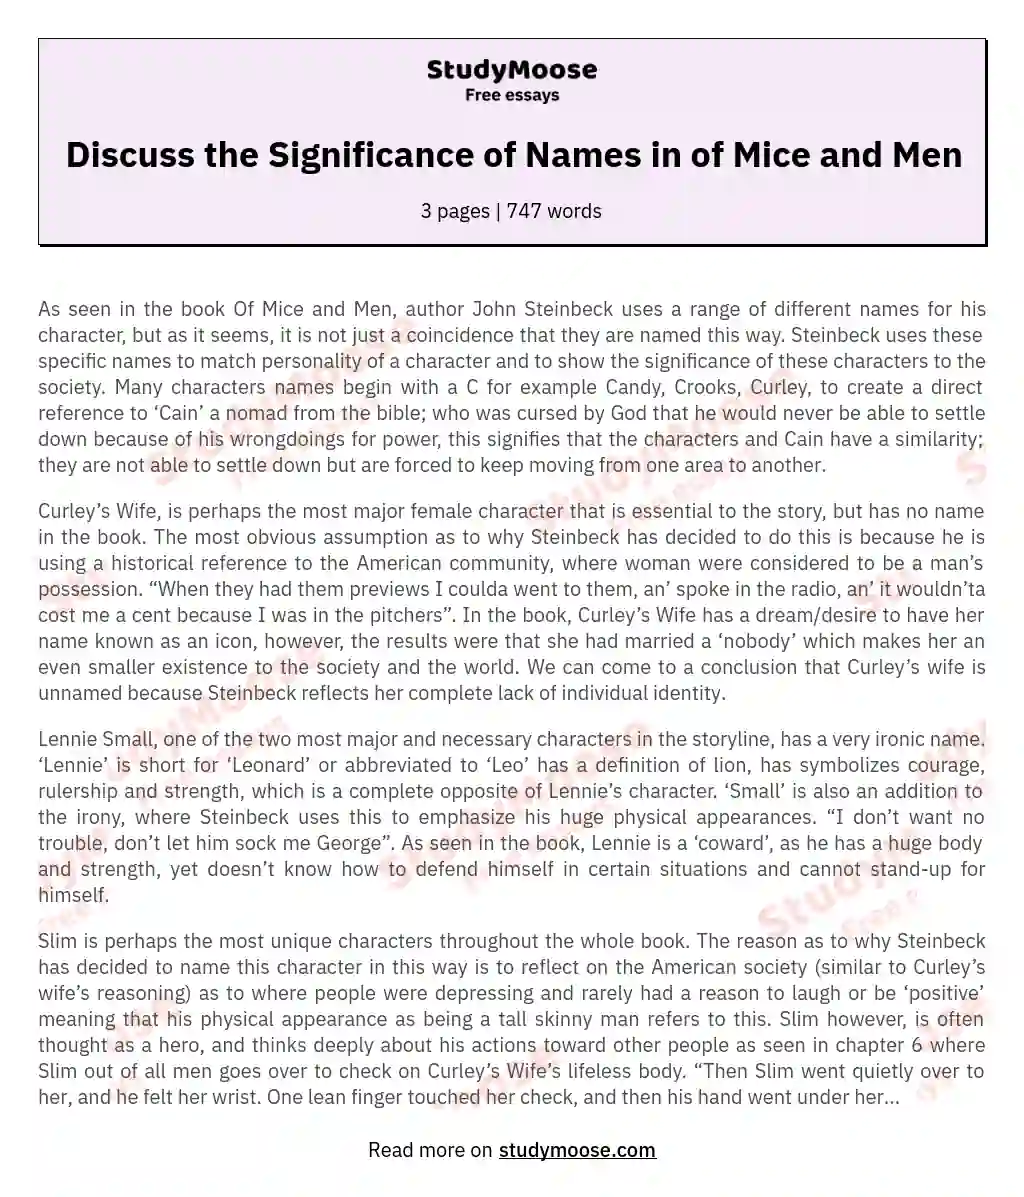 Discuss the Significance of Names in of Mice and Men essay